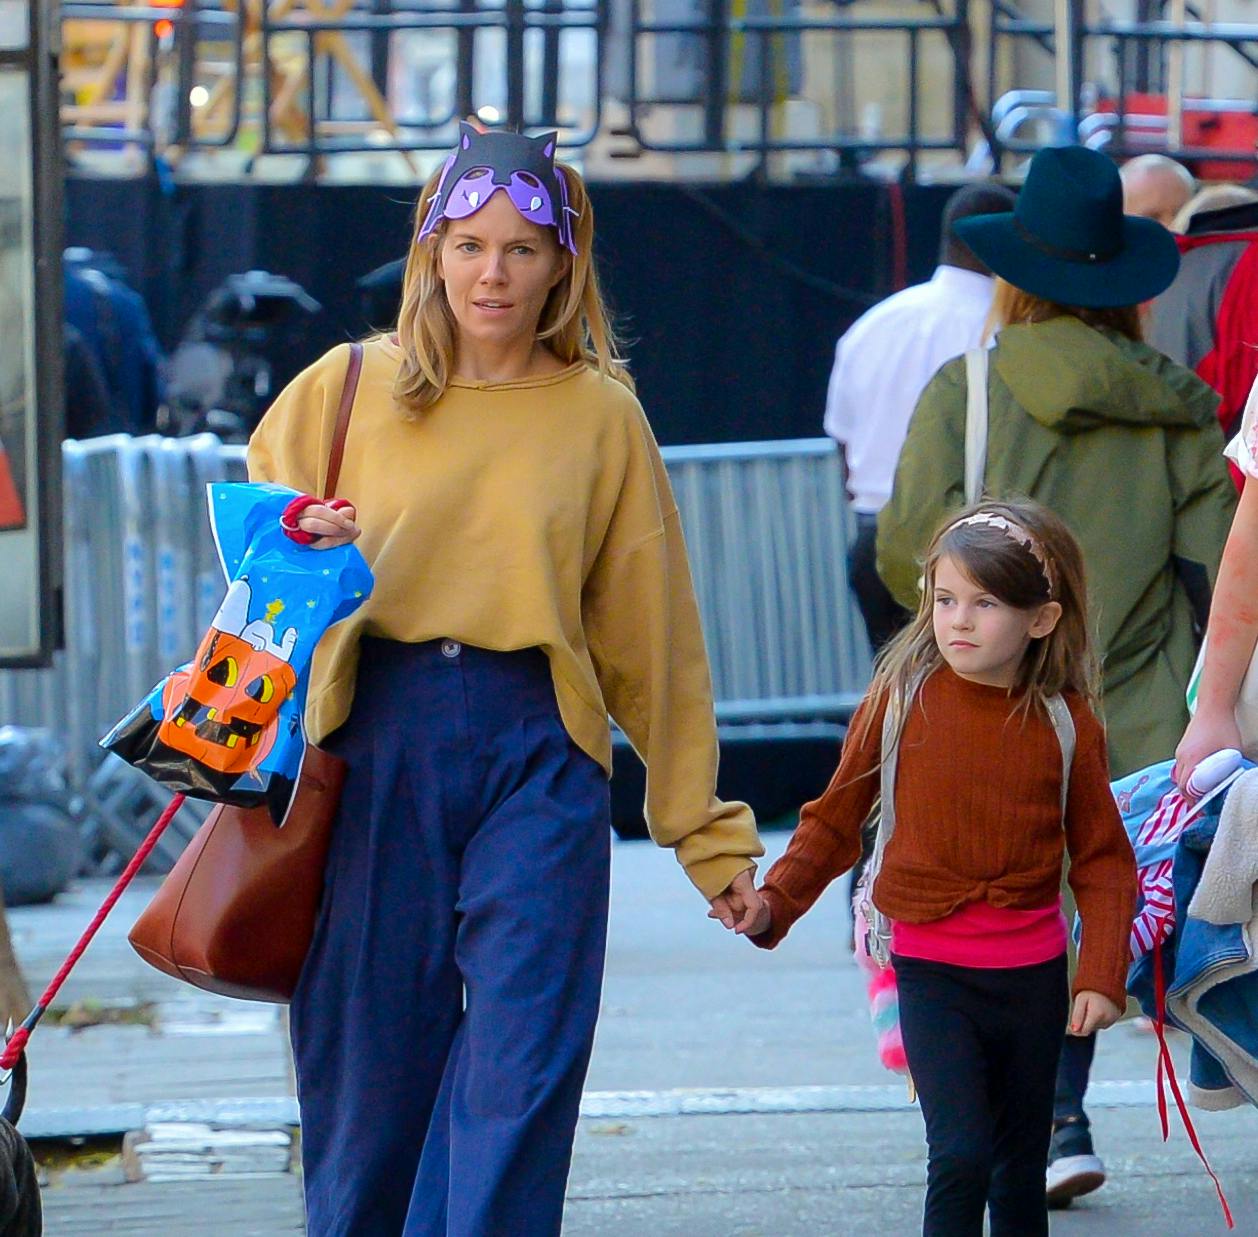 Sienna Miller and daughter Marlowe walk to the Halloween parade with go in New York. **SPECIAL INSTRUCTIONS*** Please pixelate children's faces before publication.**. 31 Oct 2018 Pictured: Sienna Miller and Marlowe Miller. Photo credit: PC / MEGA TheMegaAgency.com +1 888 505 6342 (Mega Agency TagID: MEGA300735_001.jpg) [Photo via Mega Agency]